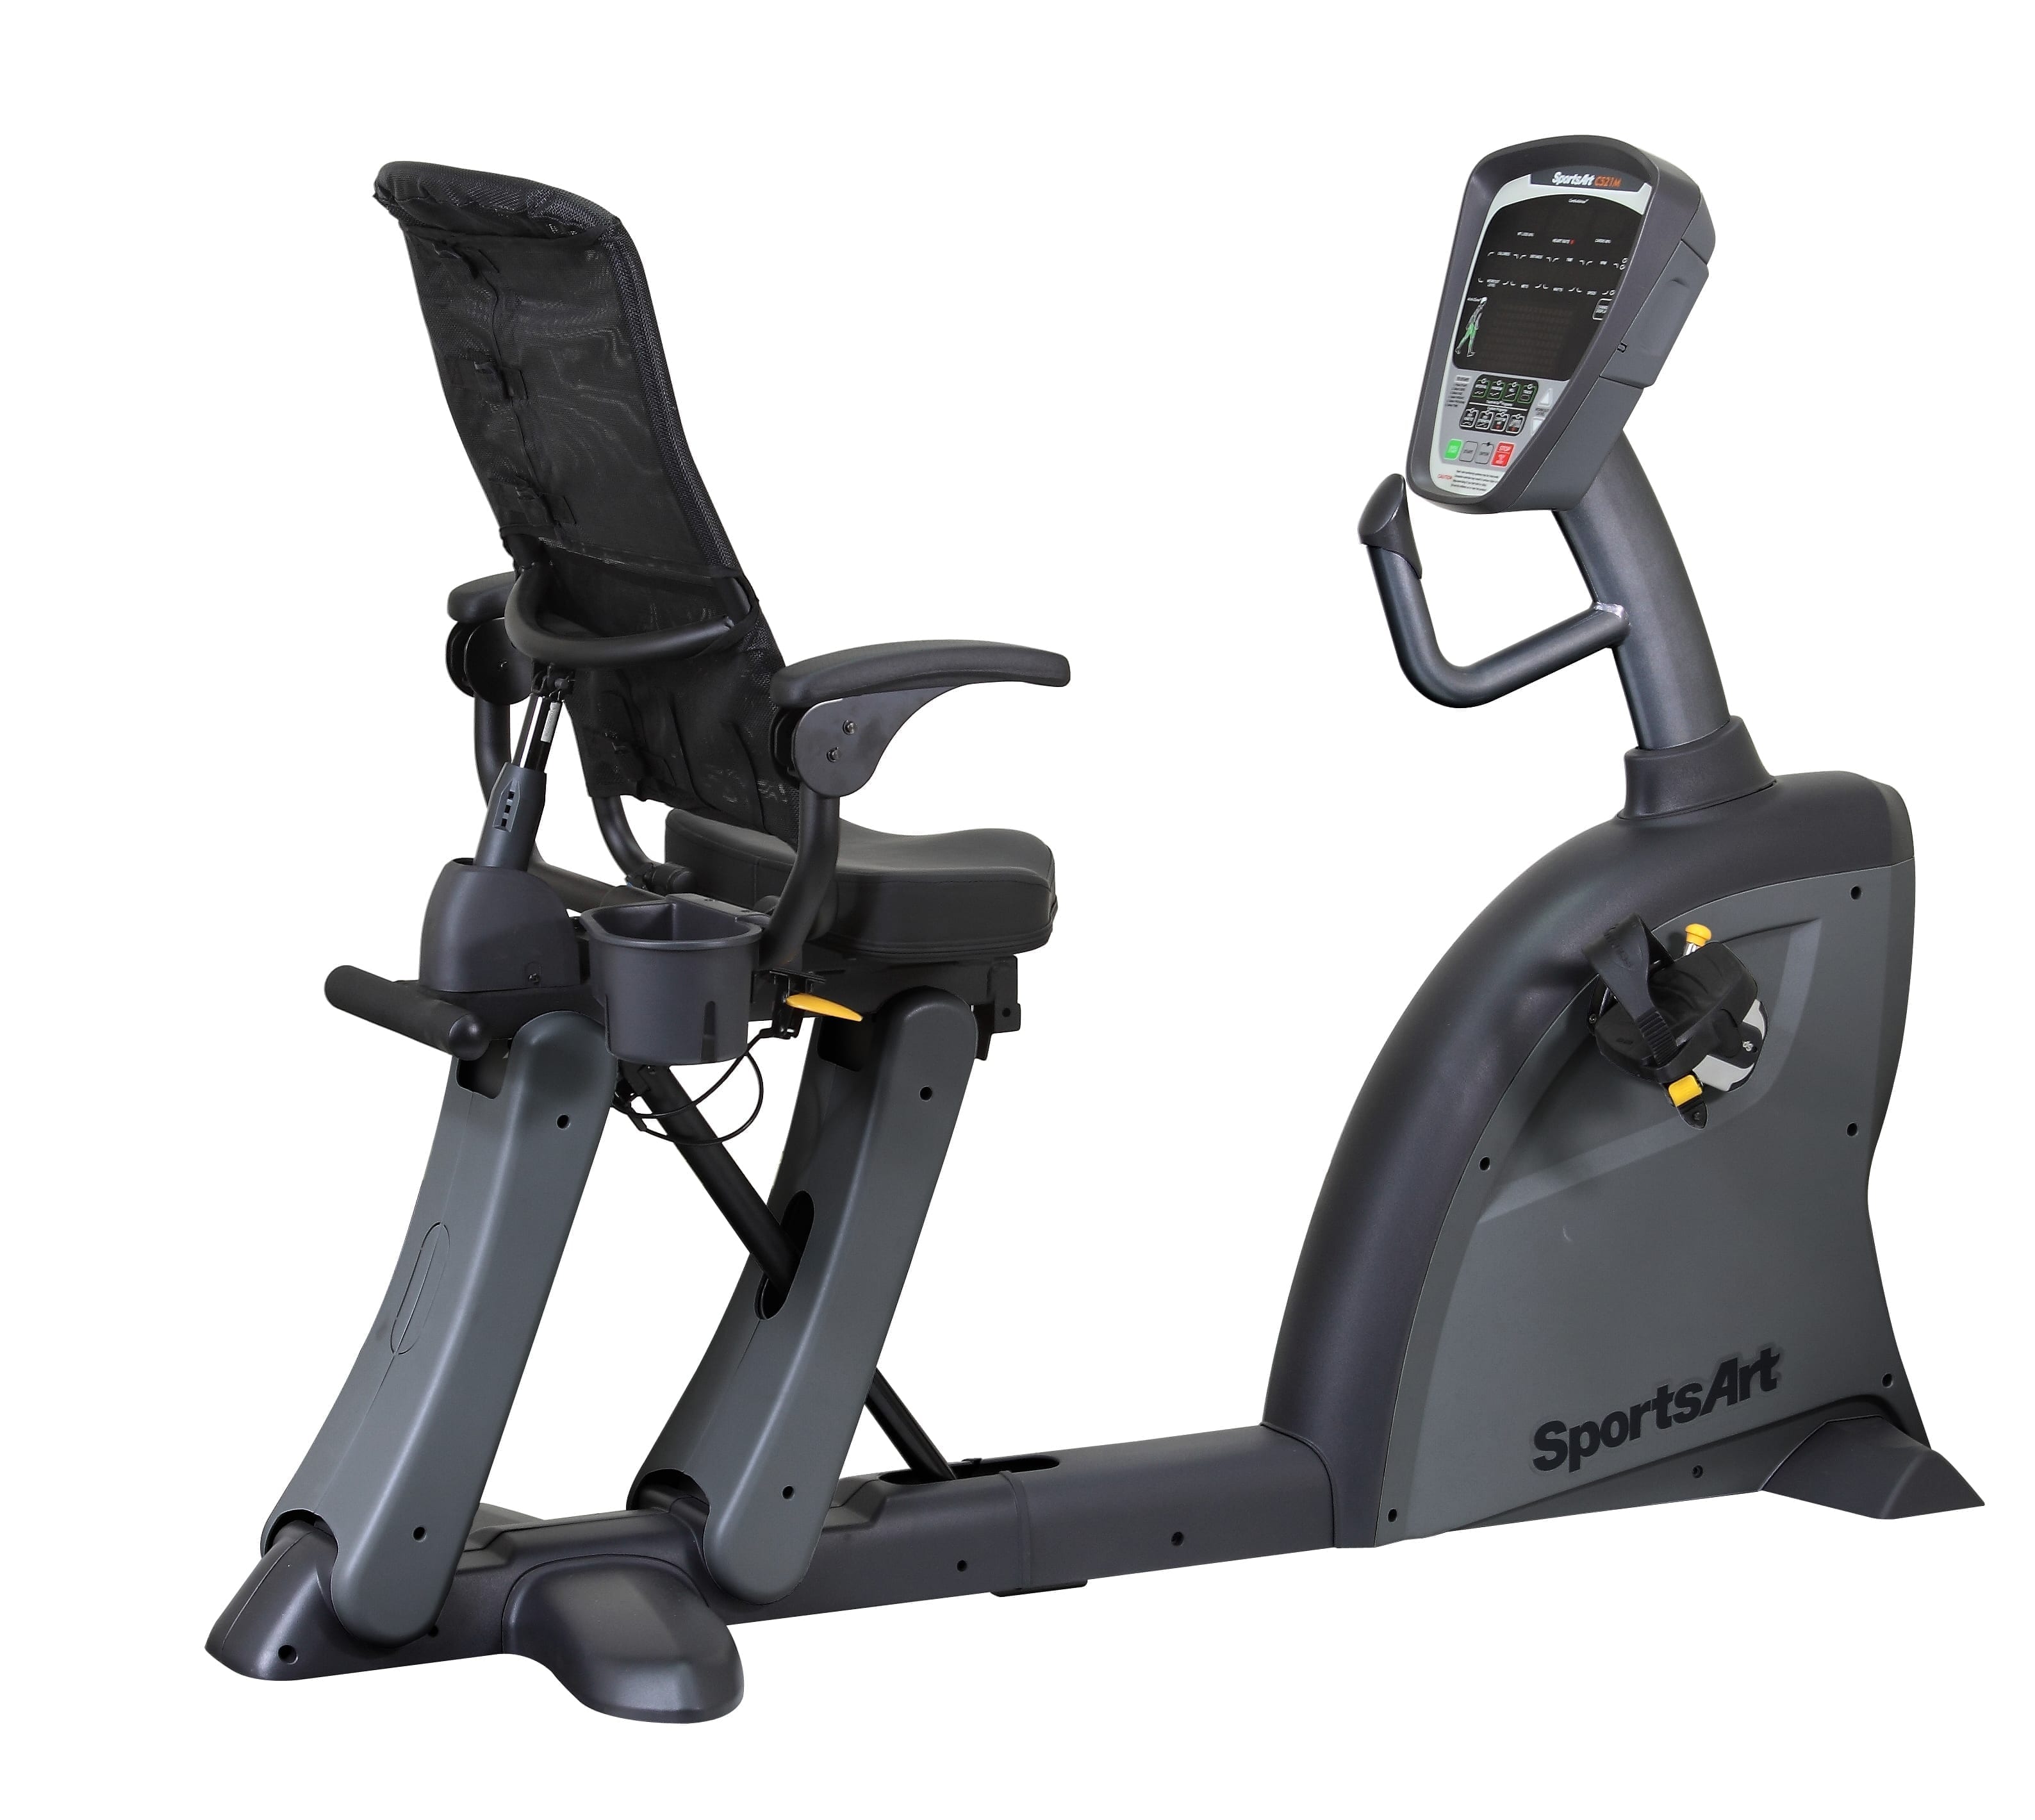 SportsArts Medical Bi Directional Cycle C521M back facing side view angled with console toward the right side